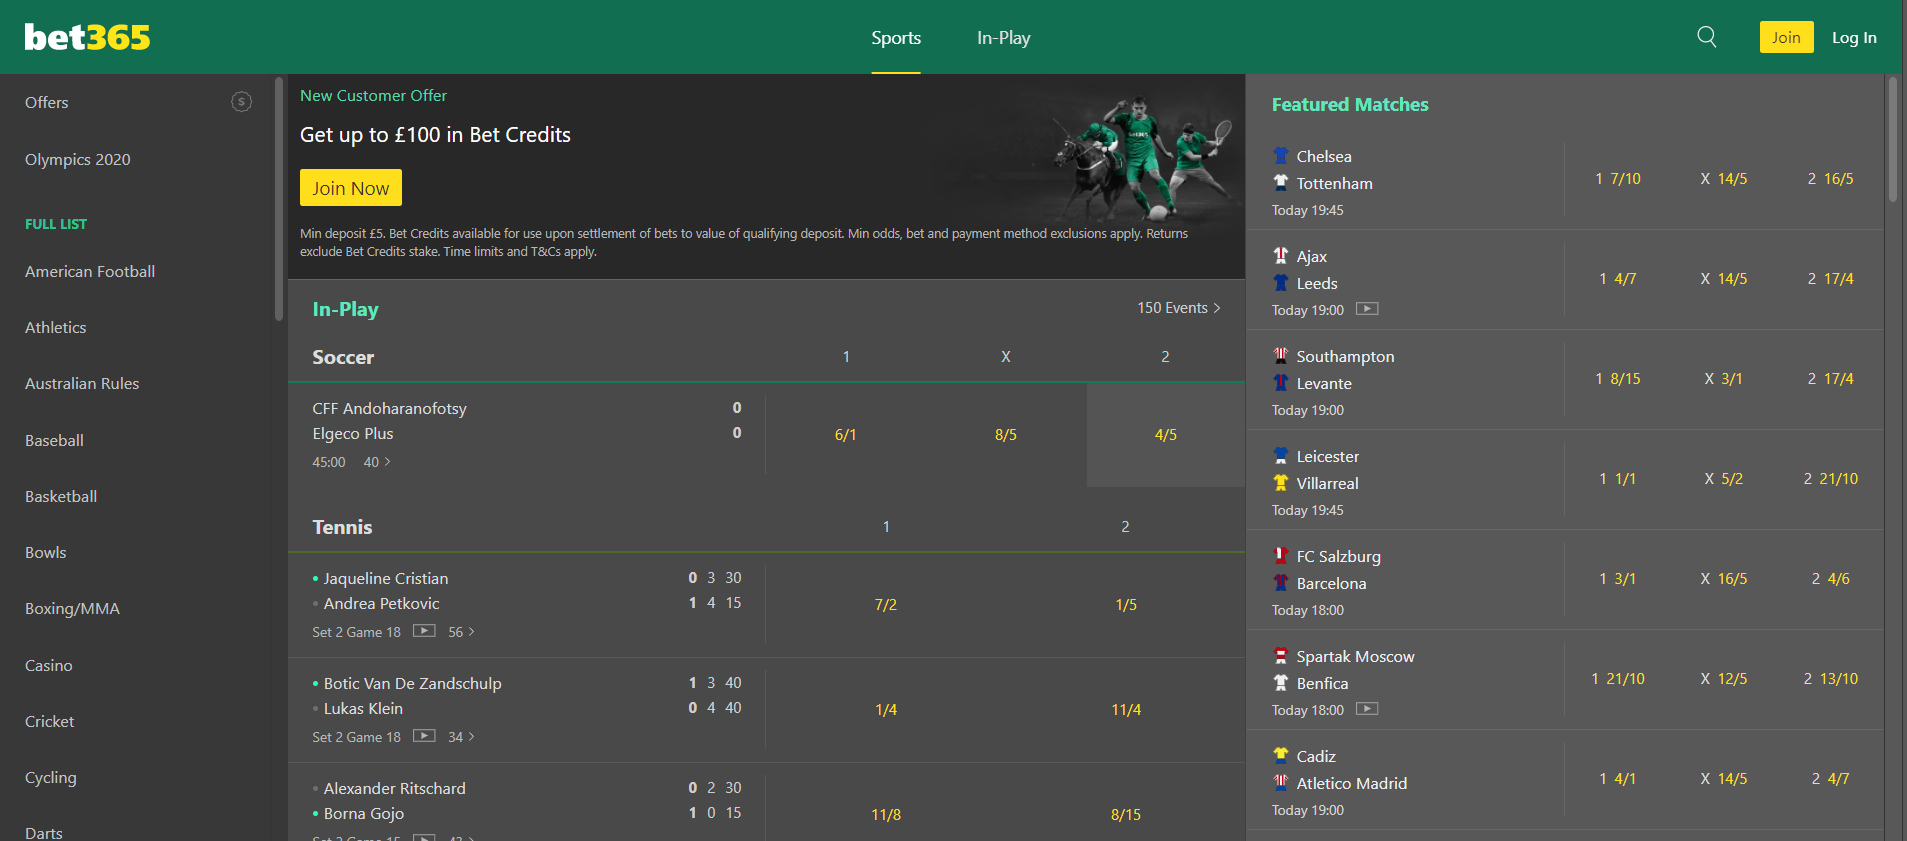 Money Line, Spread and Total game lines on a game at Bet365